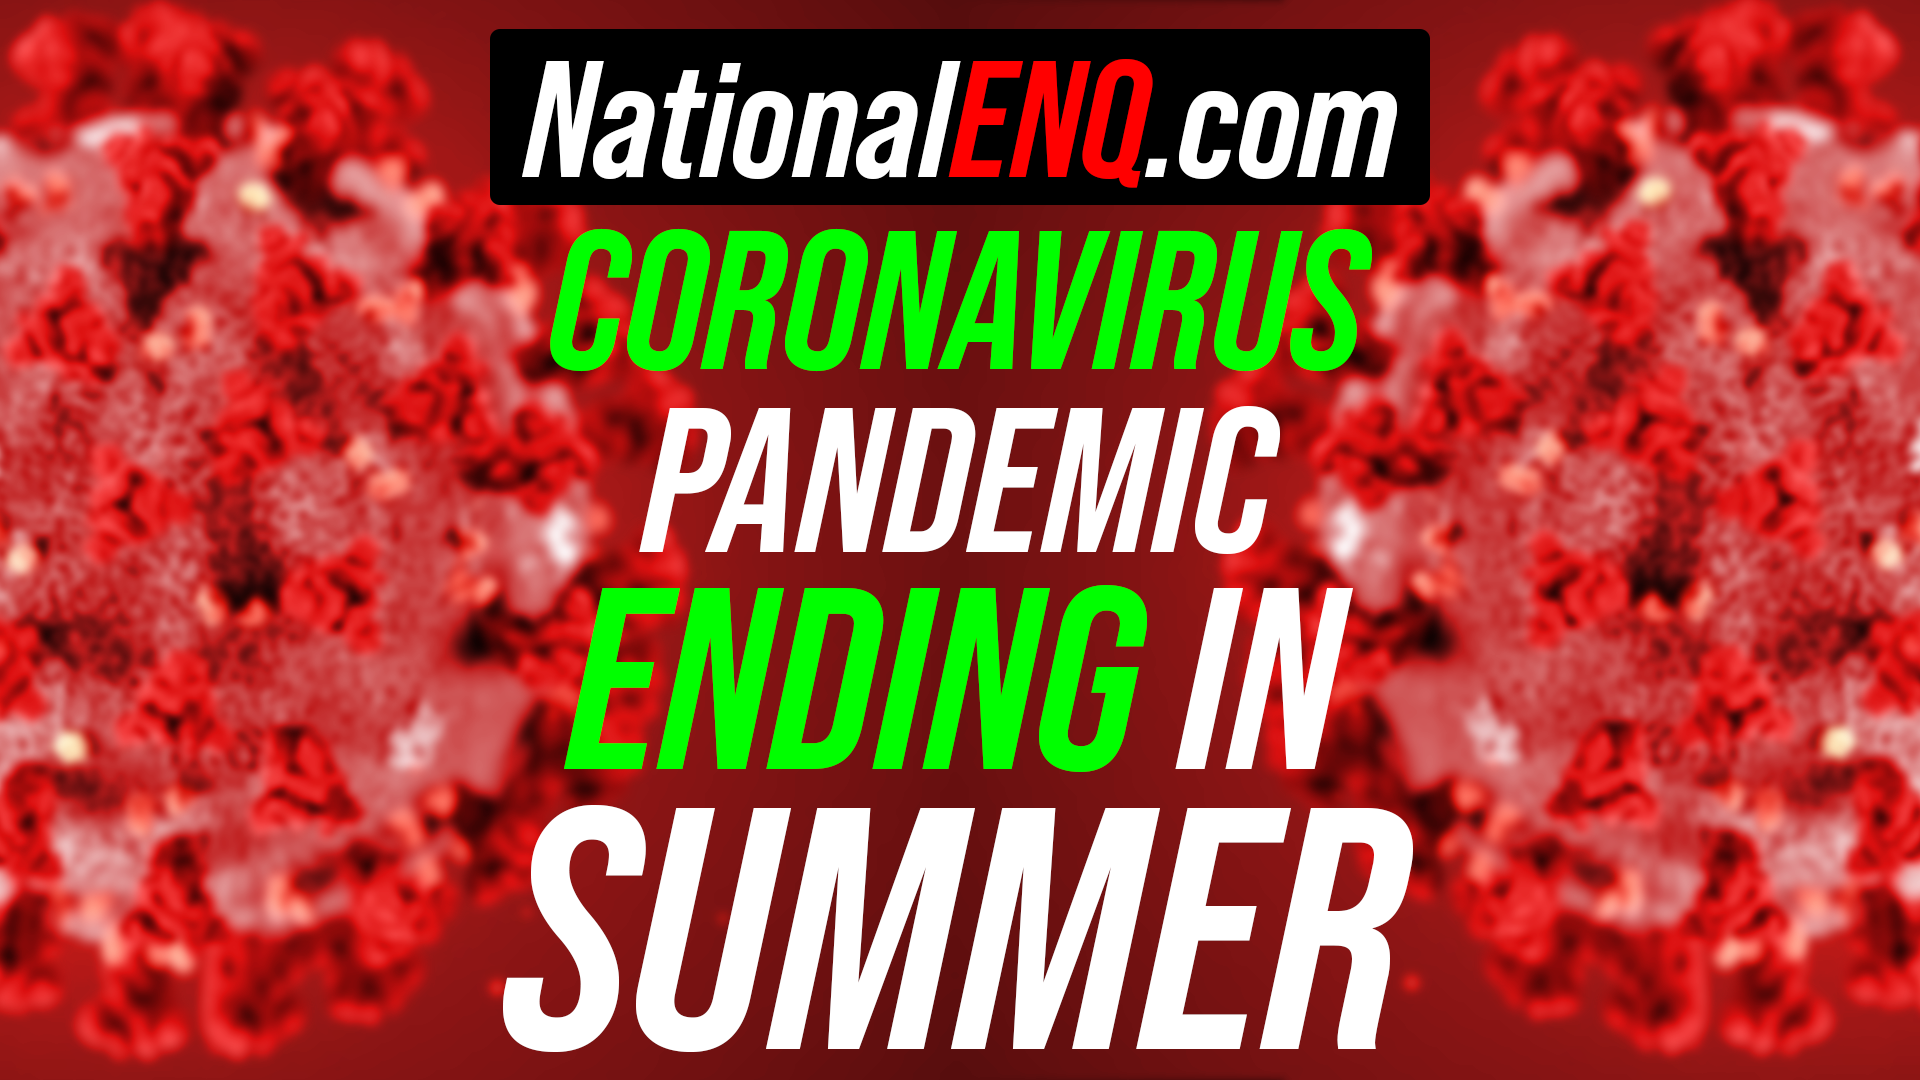 National ENQ Breaking News: Coronavirus (COVID-19) Pandemic End By Summer – Social Distancing Guidelines Extended Until April 30 by President Donald Trump, Cases Soar Past 164,000